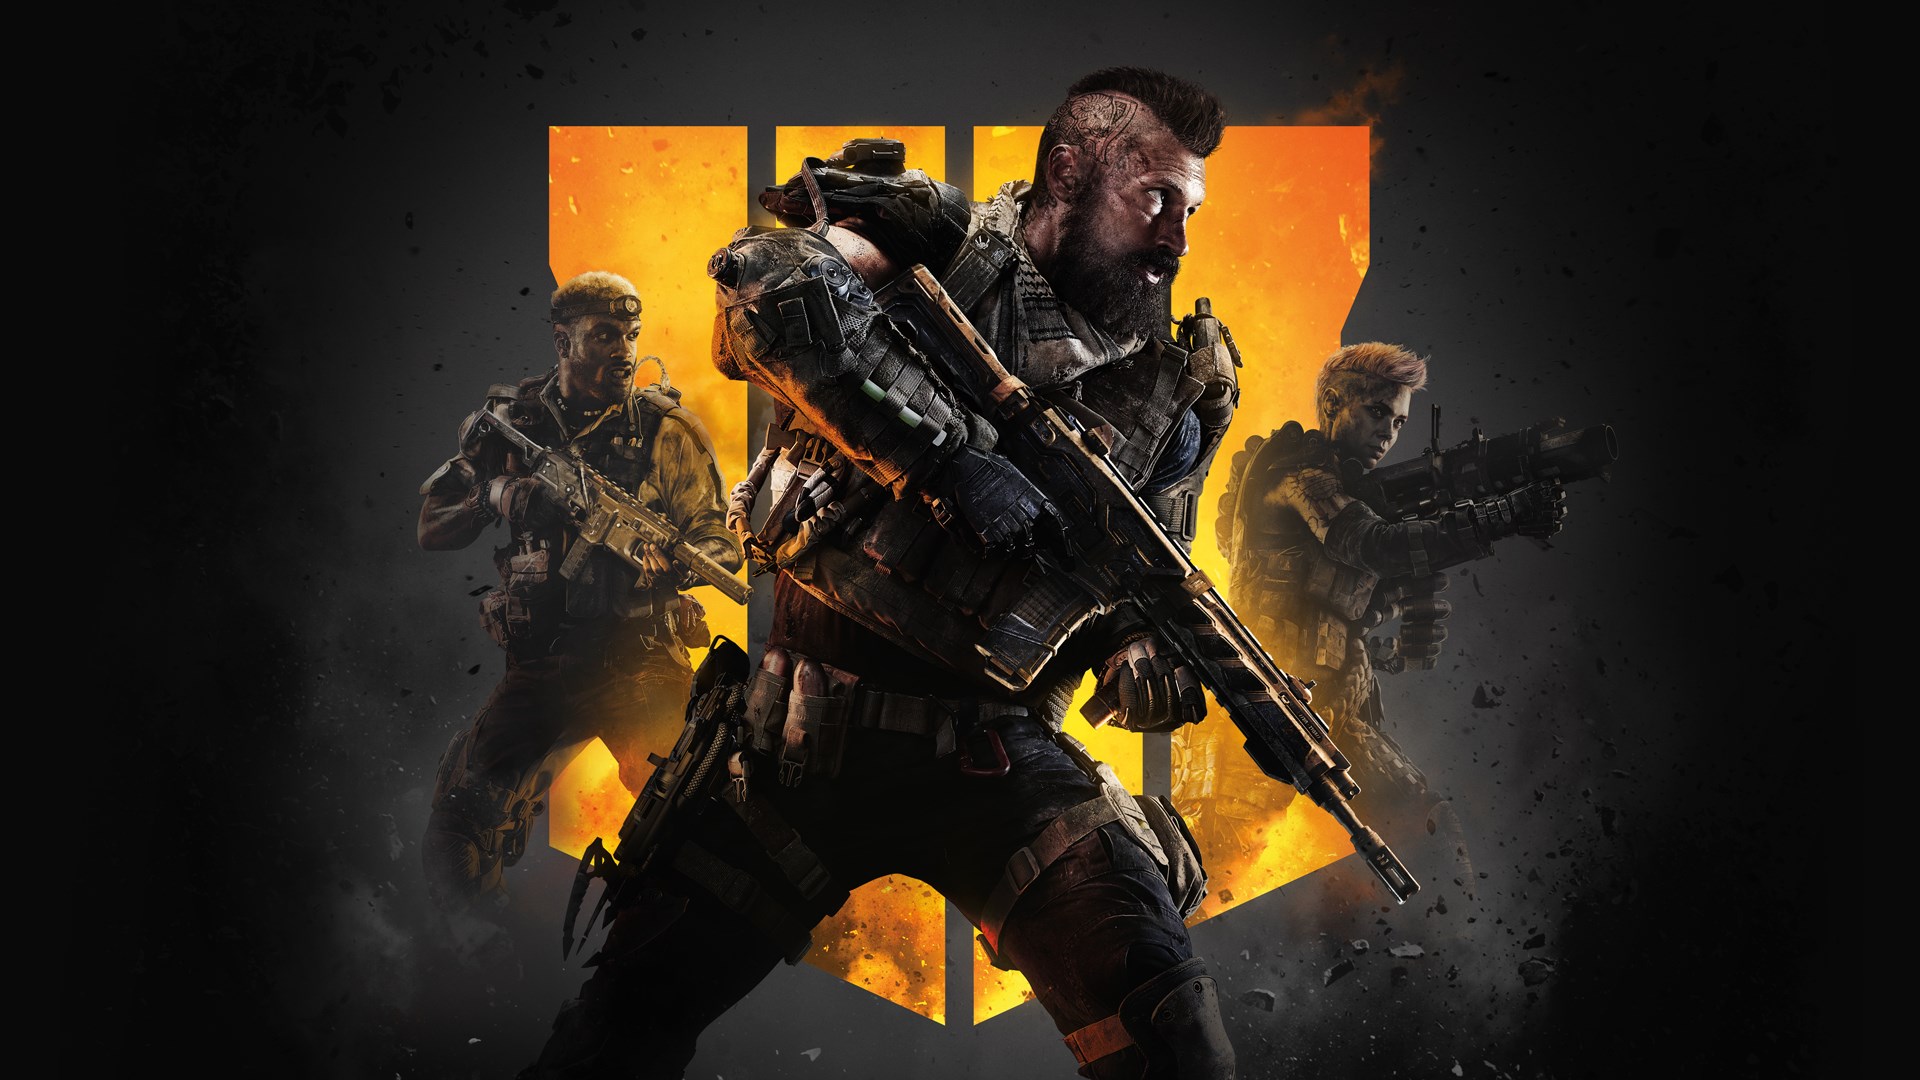 call of duty black ops 4 xbox store